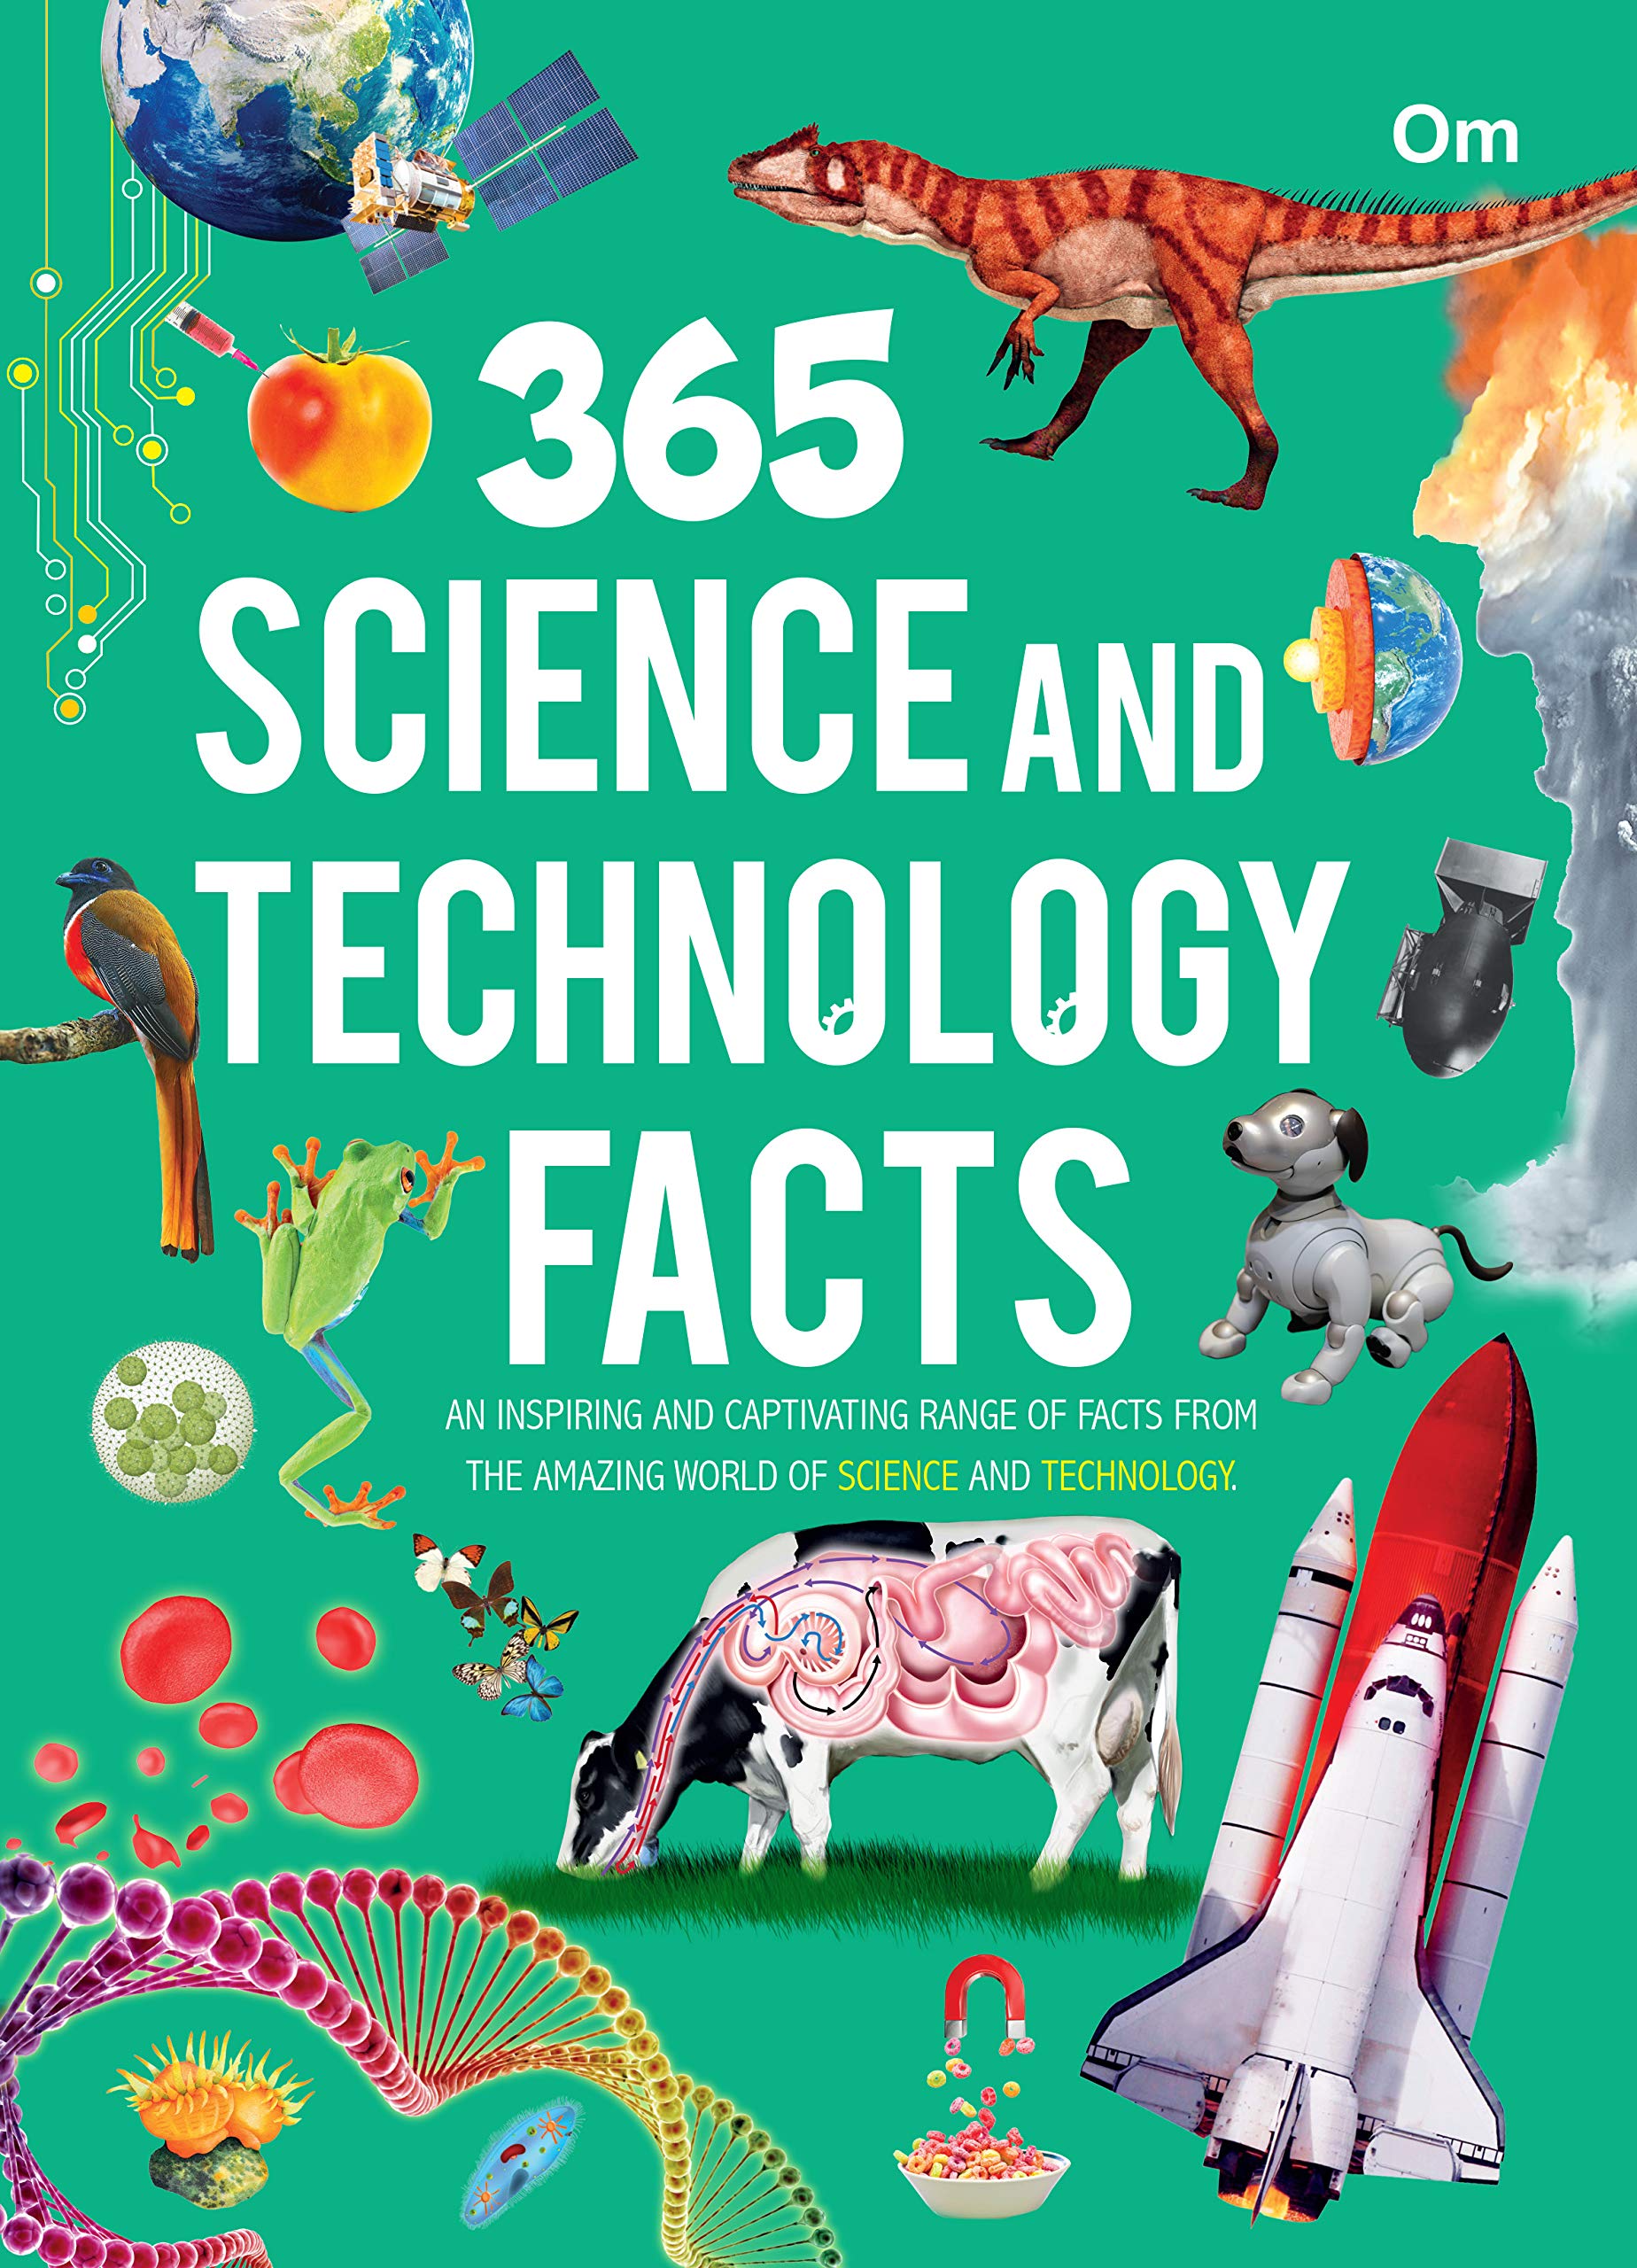 365 Science and Technology Facts (হার্ডকভার)